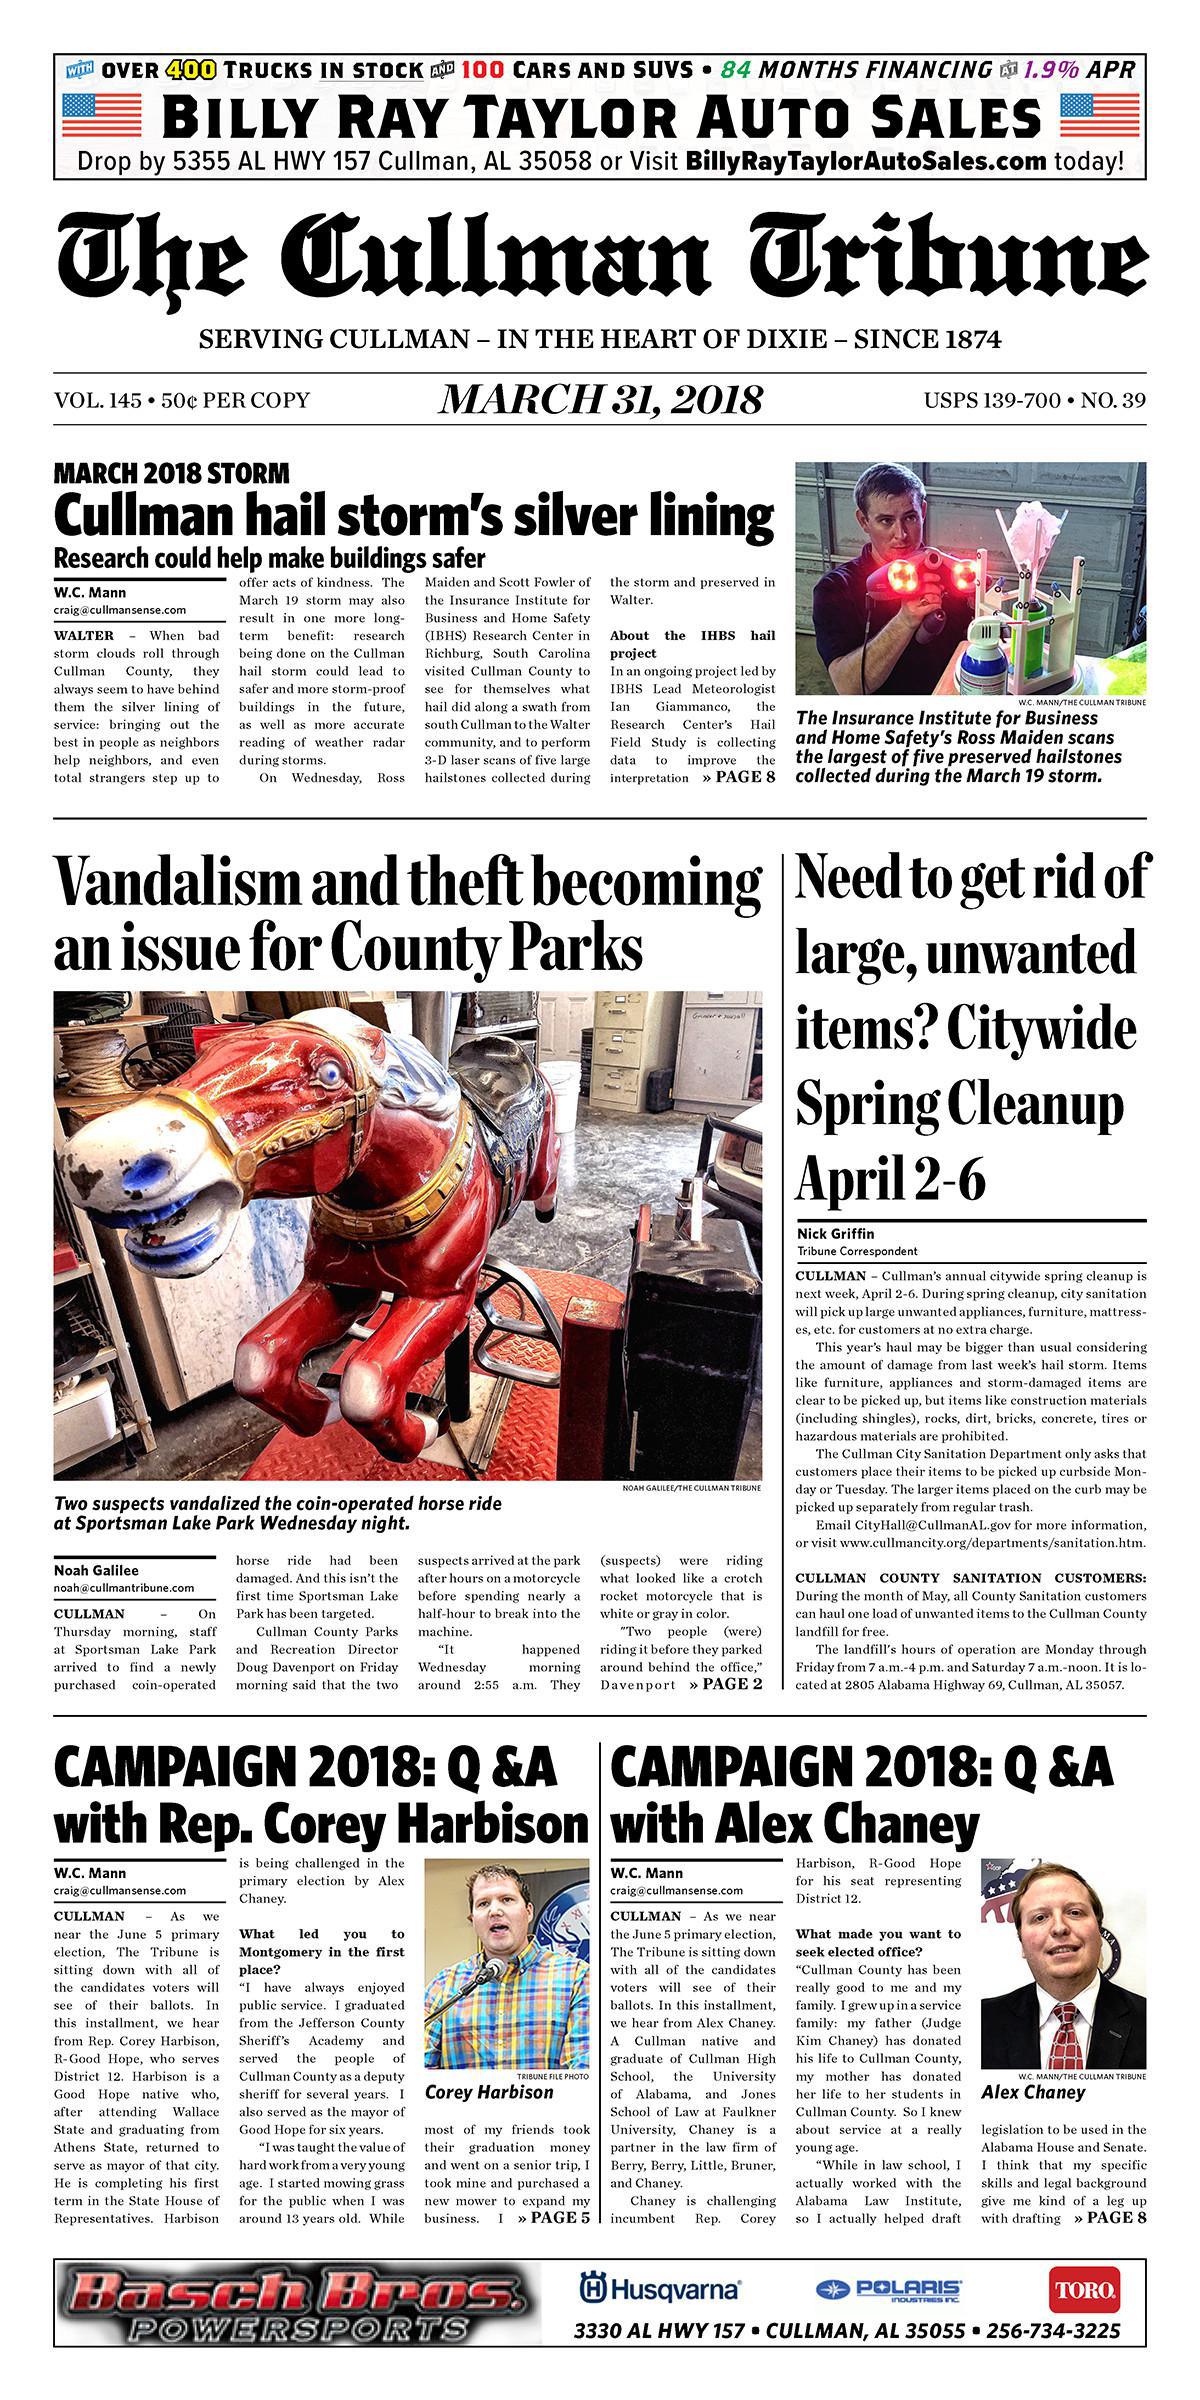 Good Morning Cullman! The 03-31-2018 edition of the Cullman Tribune is now ready to view